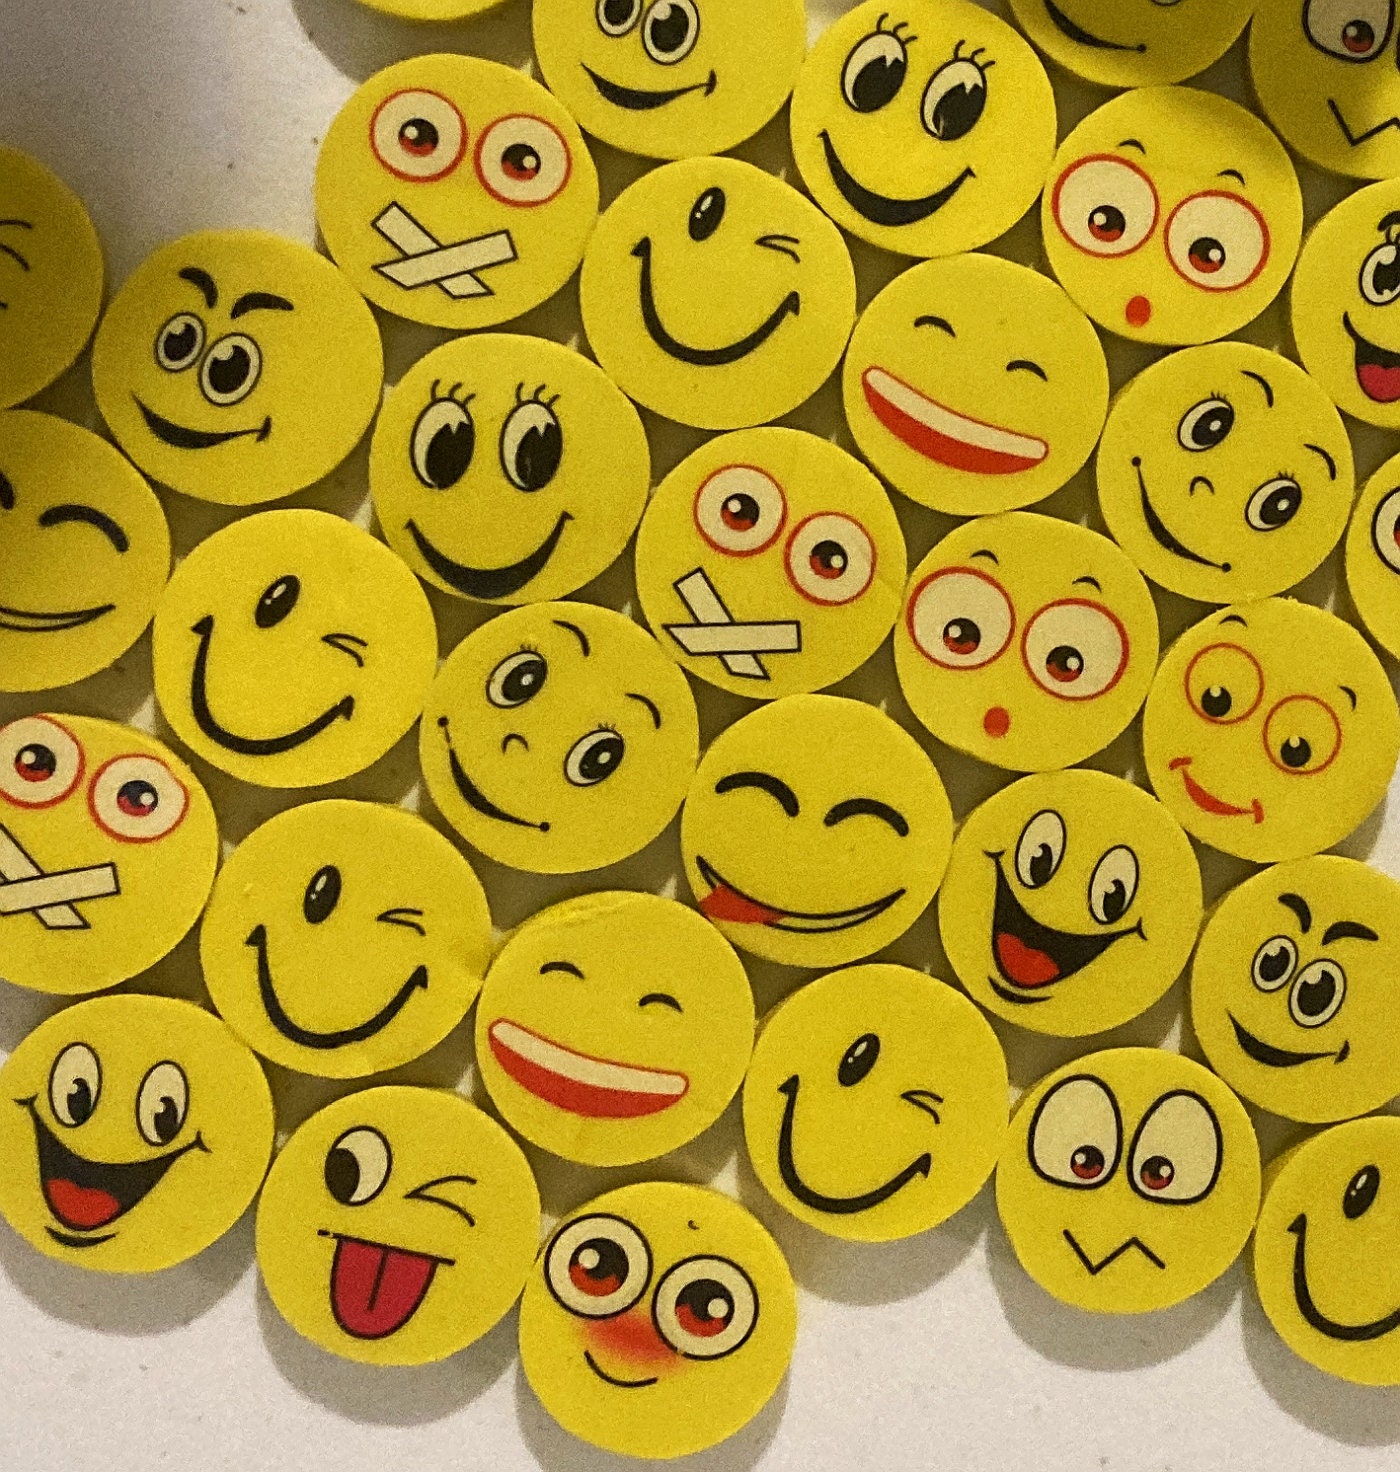 3 Pk Emoticon Eraser Pencil Toppers Smiley Face Kids Fun Stationery Gift Set 3+y 